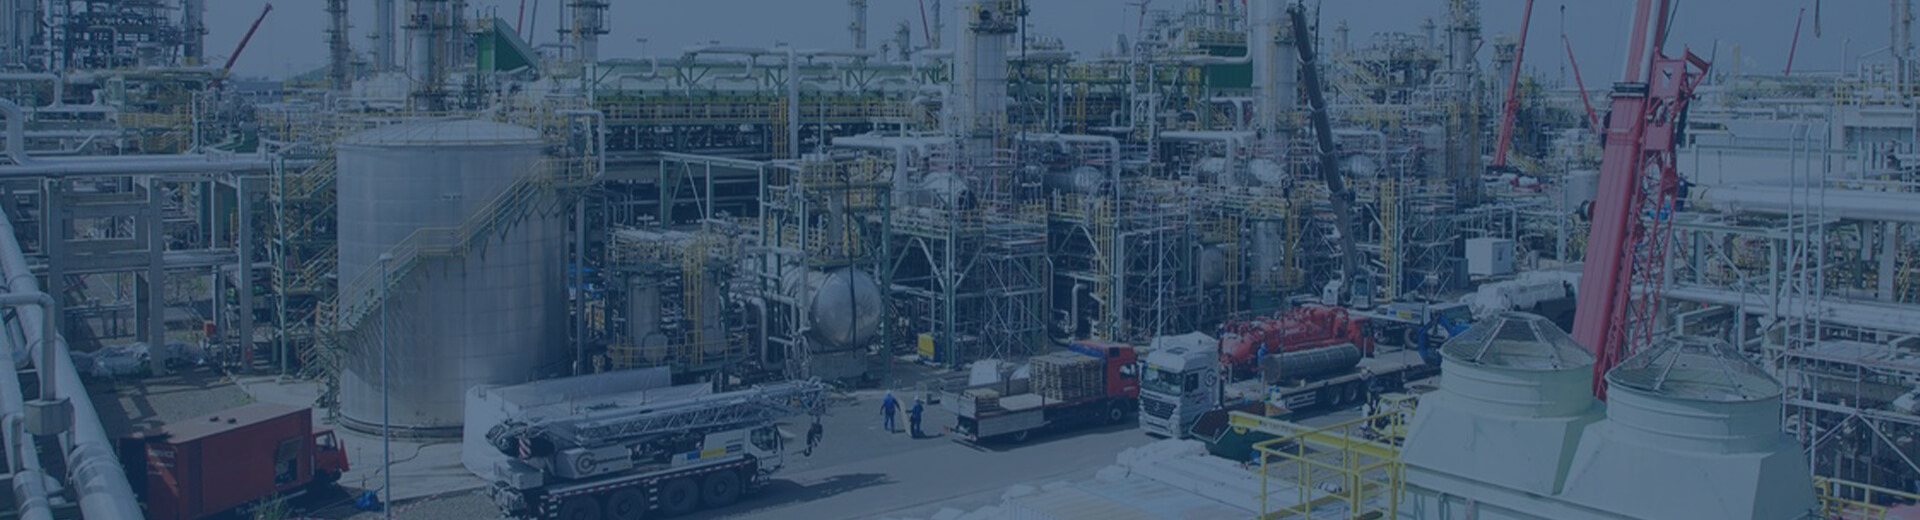 Refineries and industrial plants use PacTec products to help with turnaround season